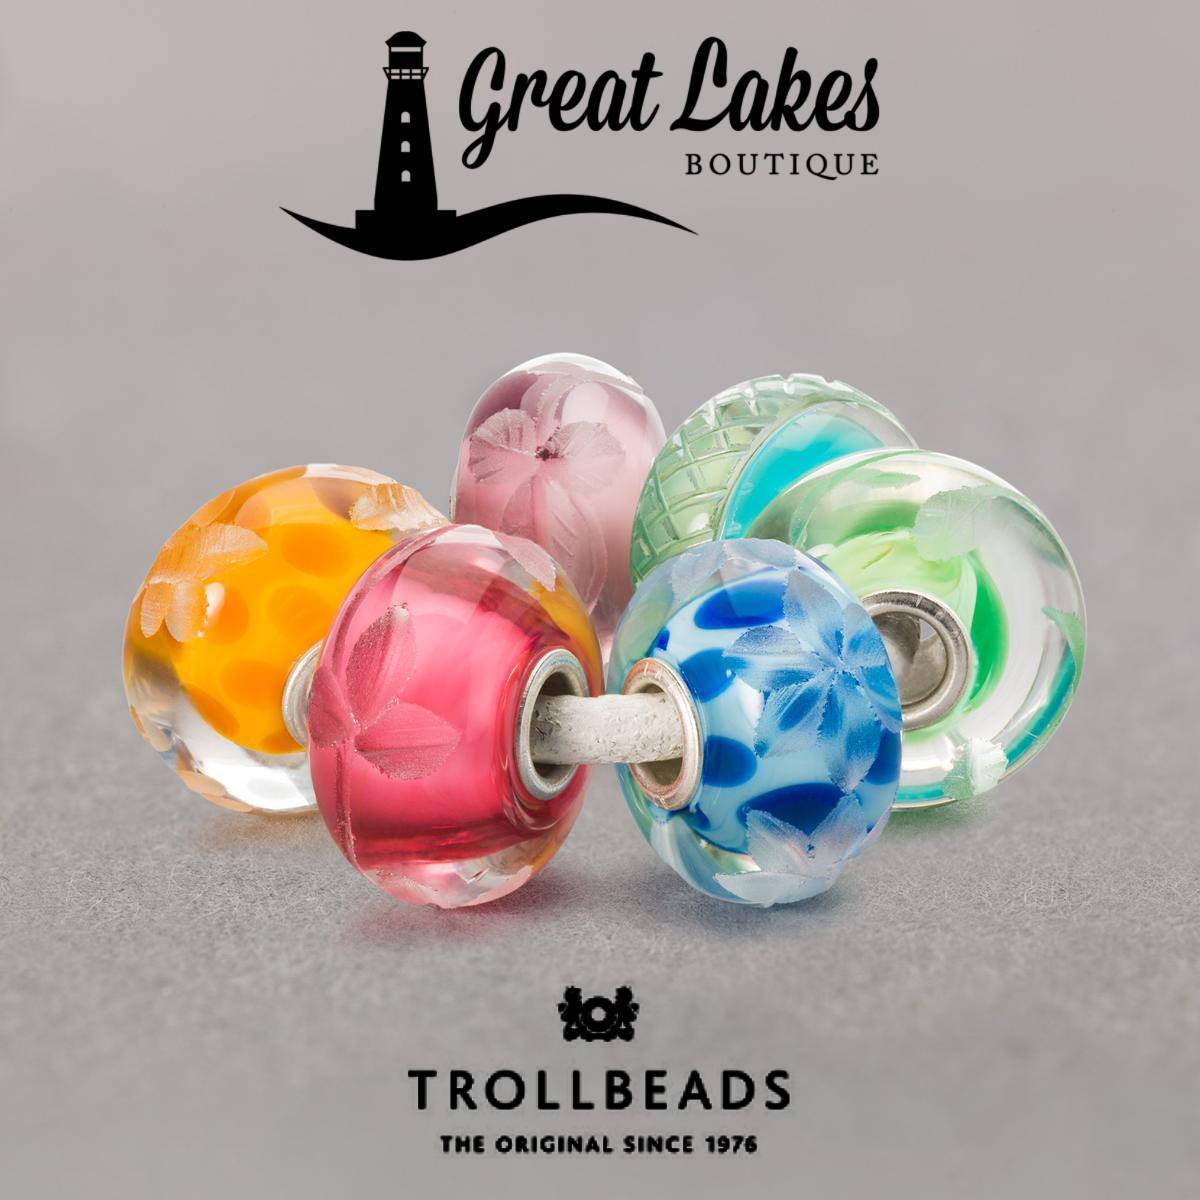 Trollbeads Day 2020 Preview